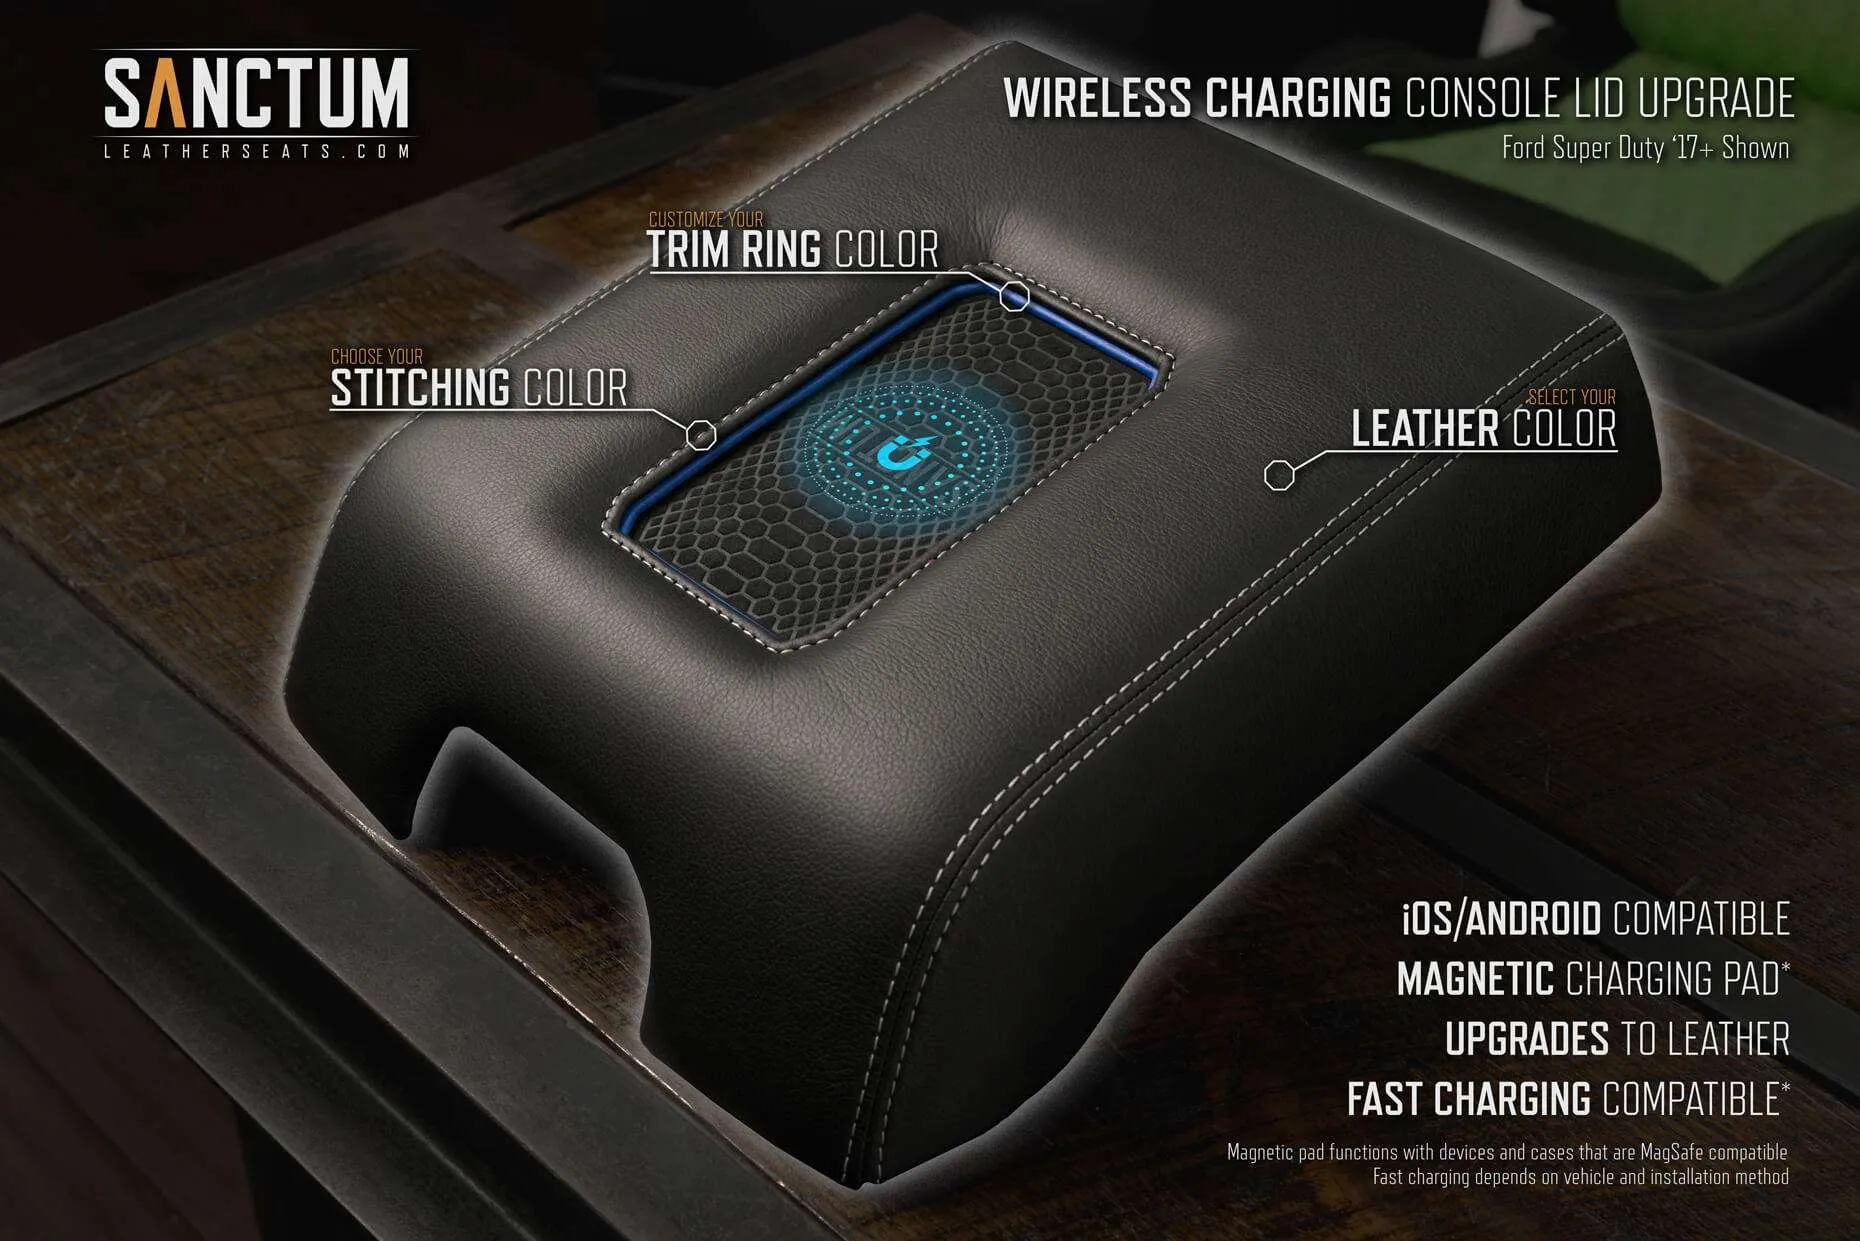 Ford Super Duty 17+ Sanctum Wireless Charging Console Features